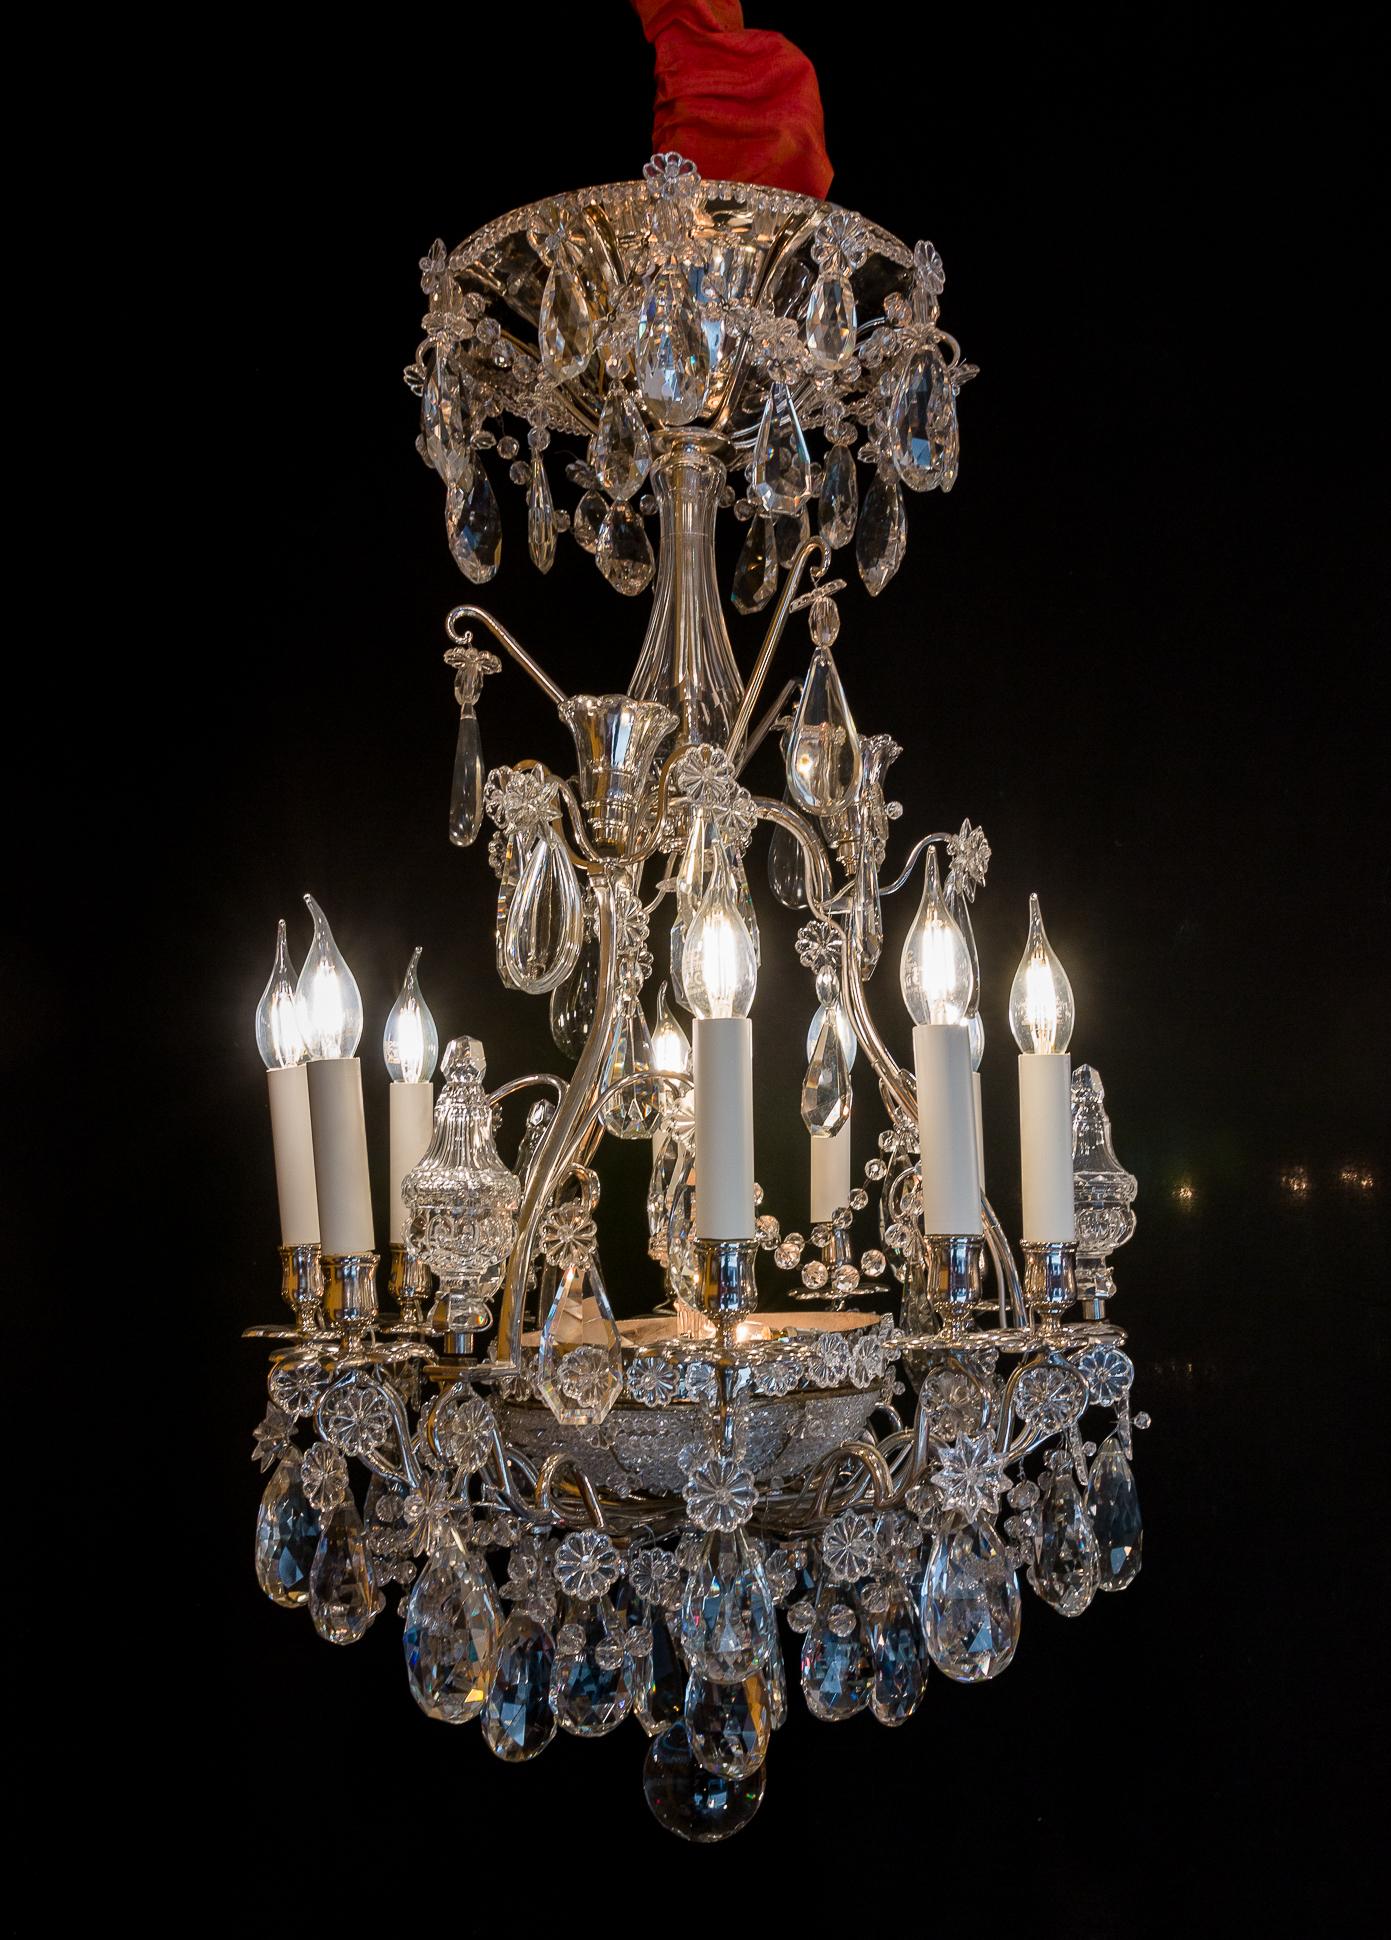 French pair of chandeliers by Baguès & Baccarat, silver-plate and cut crystal, circa 1880.

Amazing, rare, elegant and ornamental silver-plate pair of French chandeliers with nine elegantly scrolled arm lights and six internal lights. 
Our pair